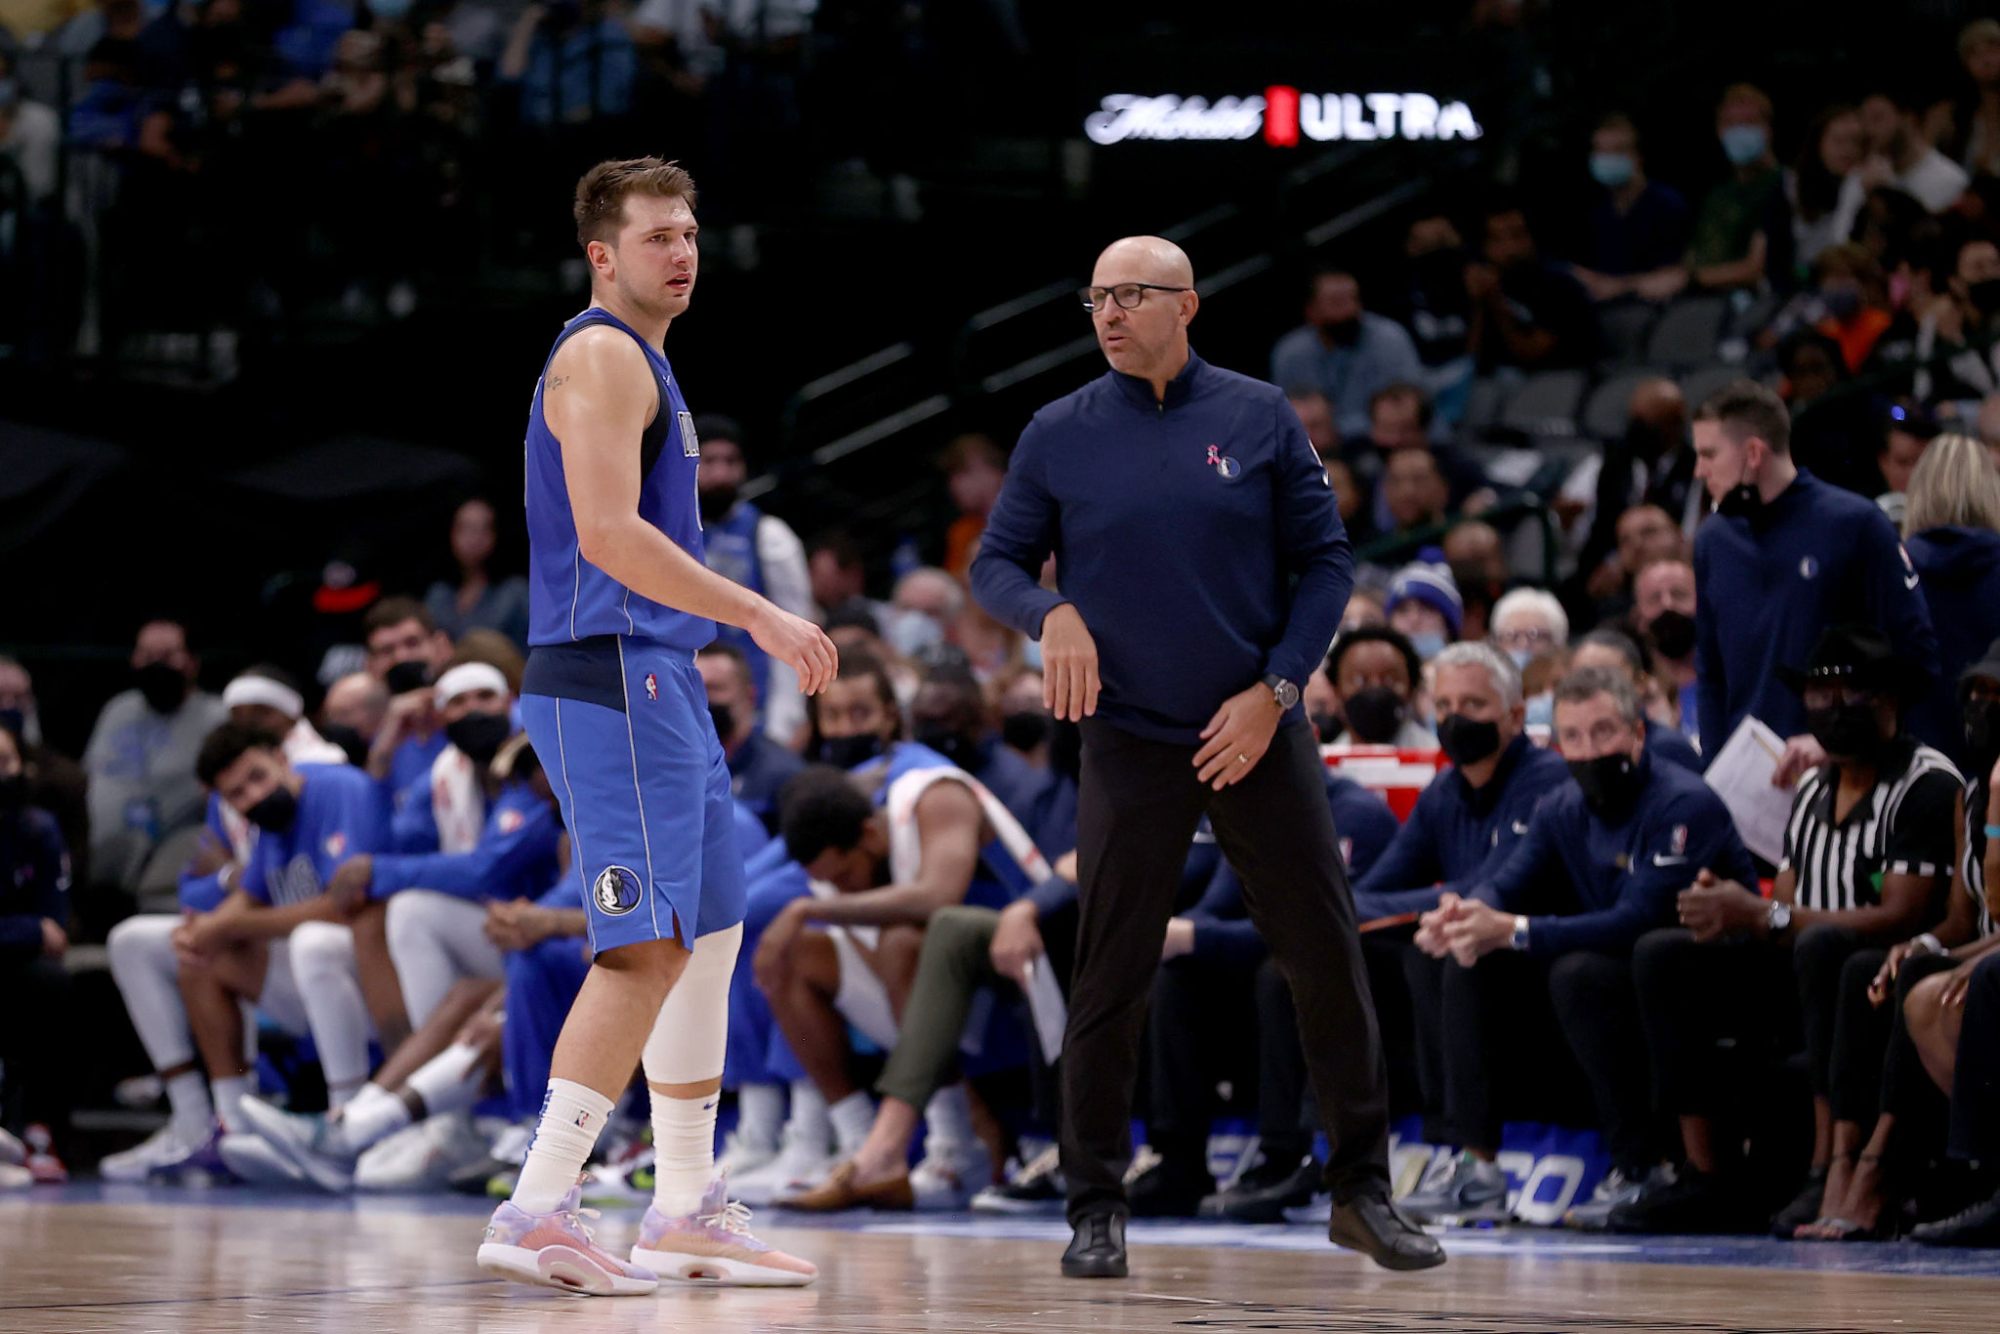 Dallas Mavericks star Luka Doncic speaks with coach Jason Kidd during a game against the Sacramento Kings in October.